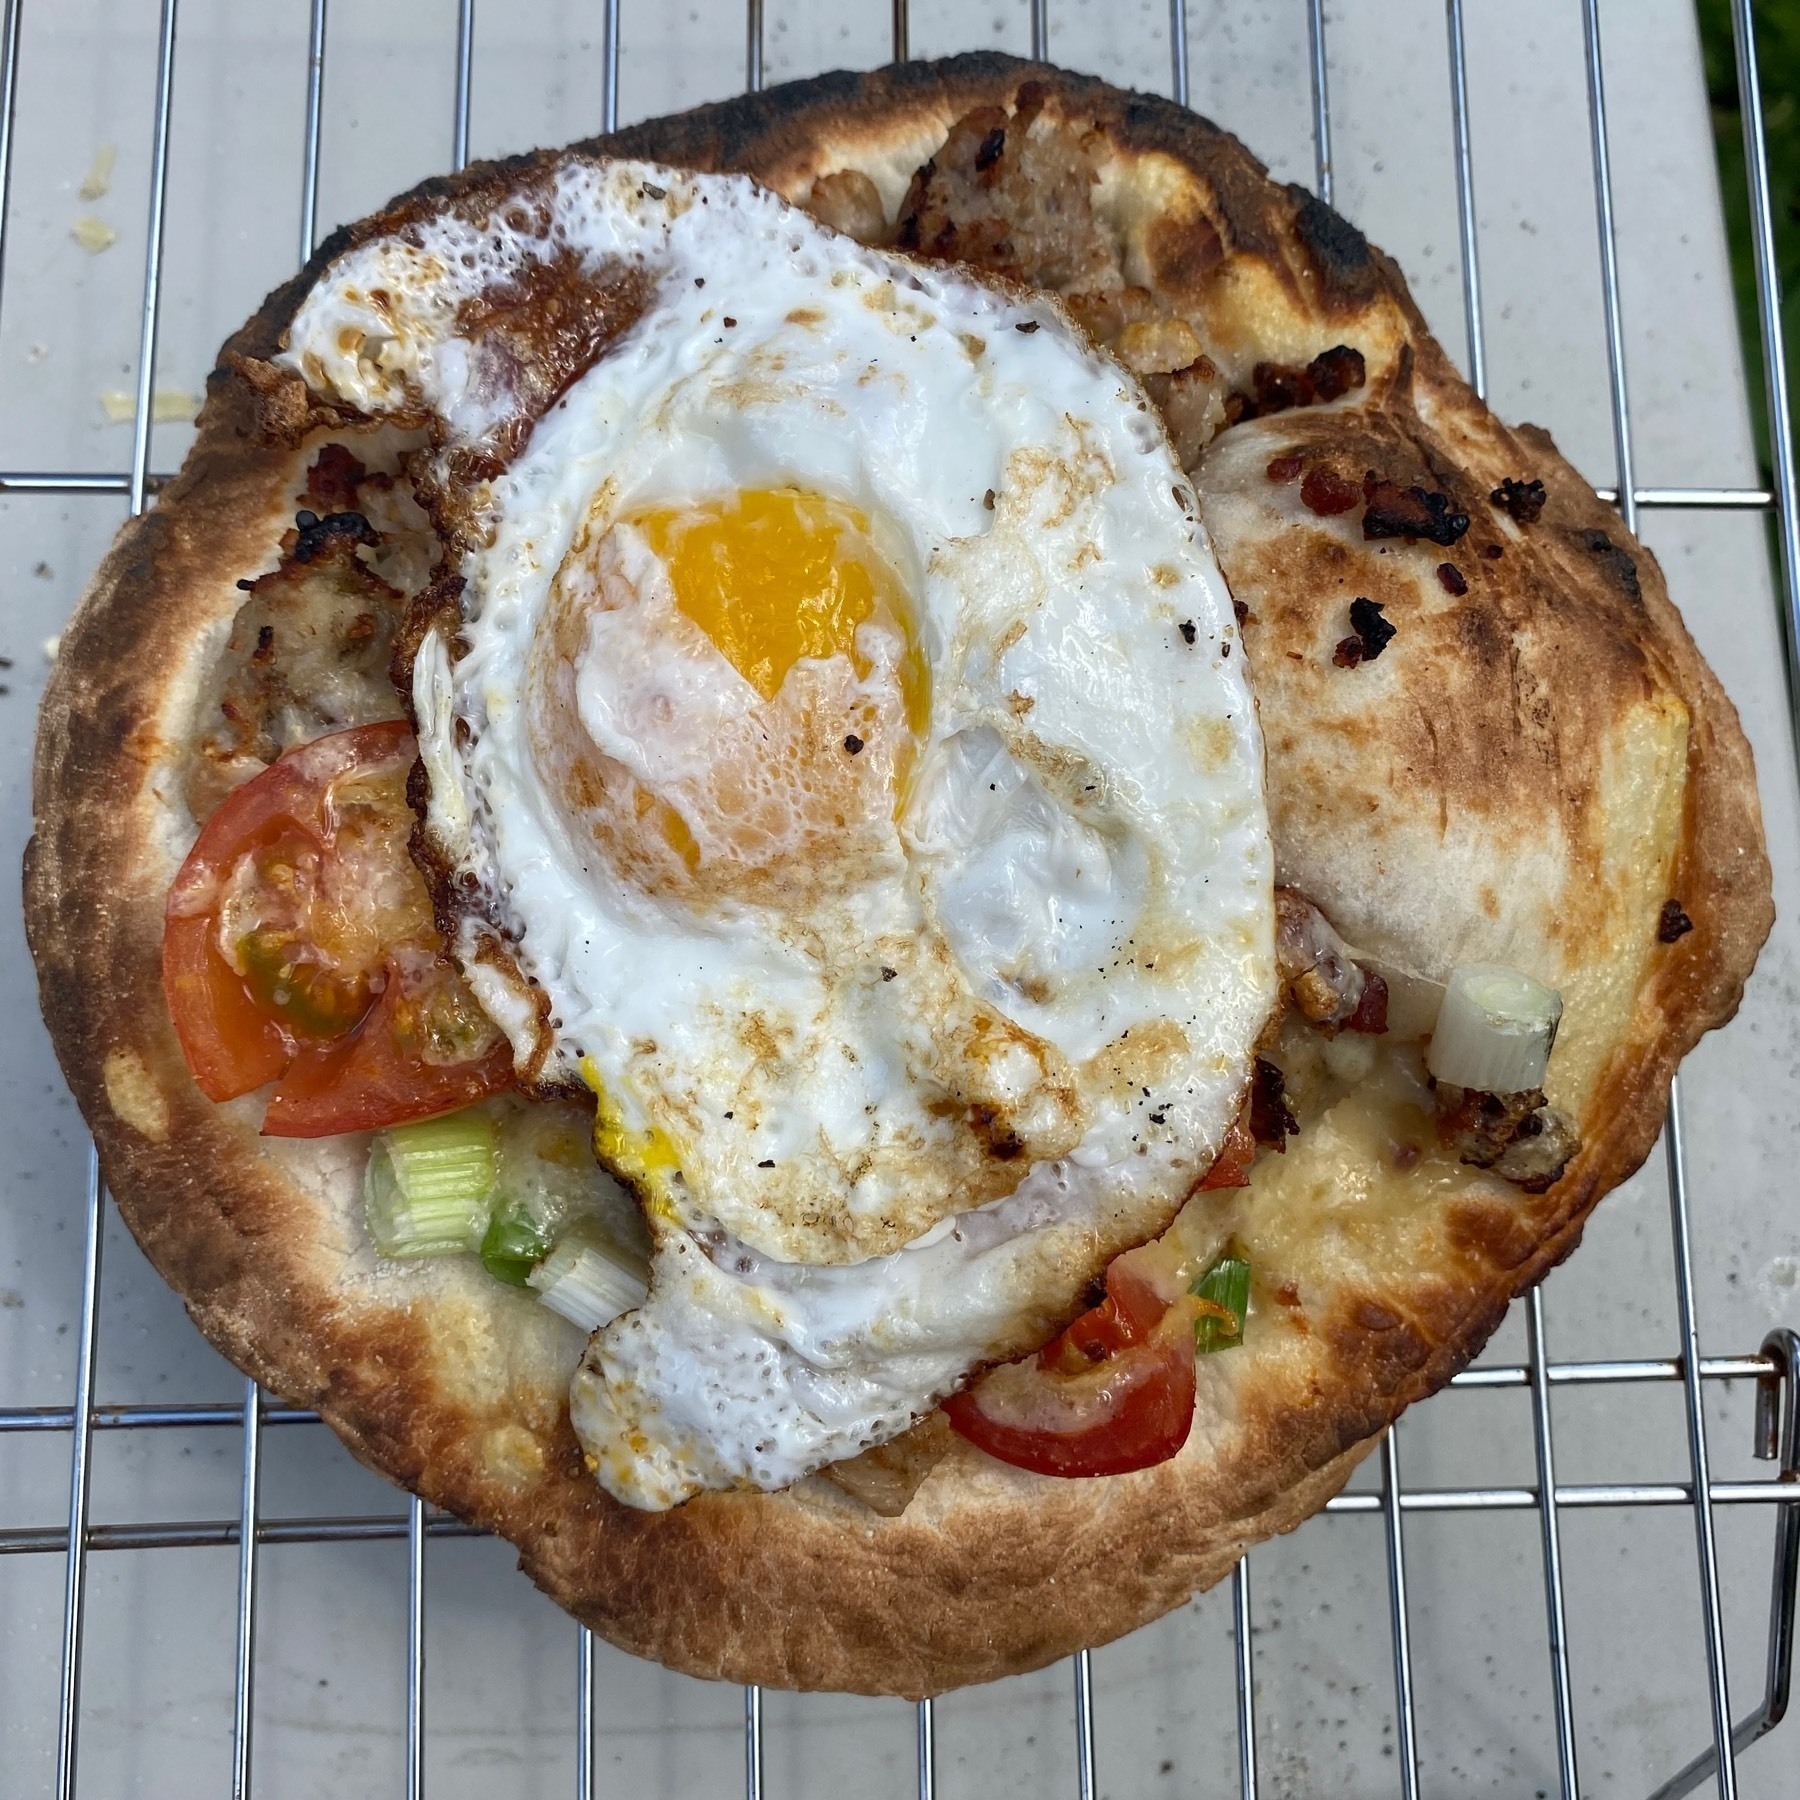 Small pizza with a fried egg on top.